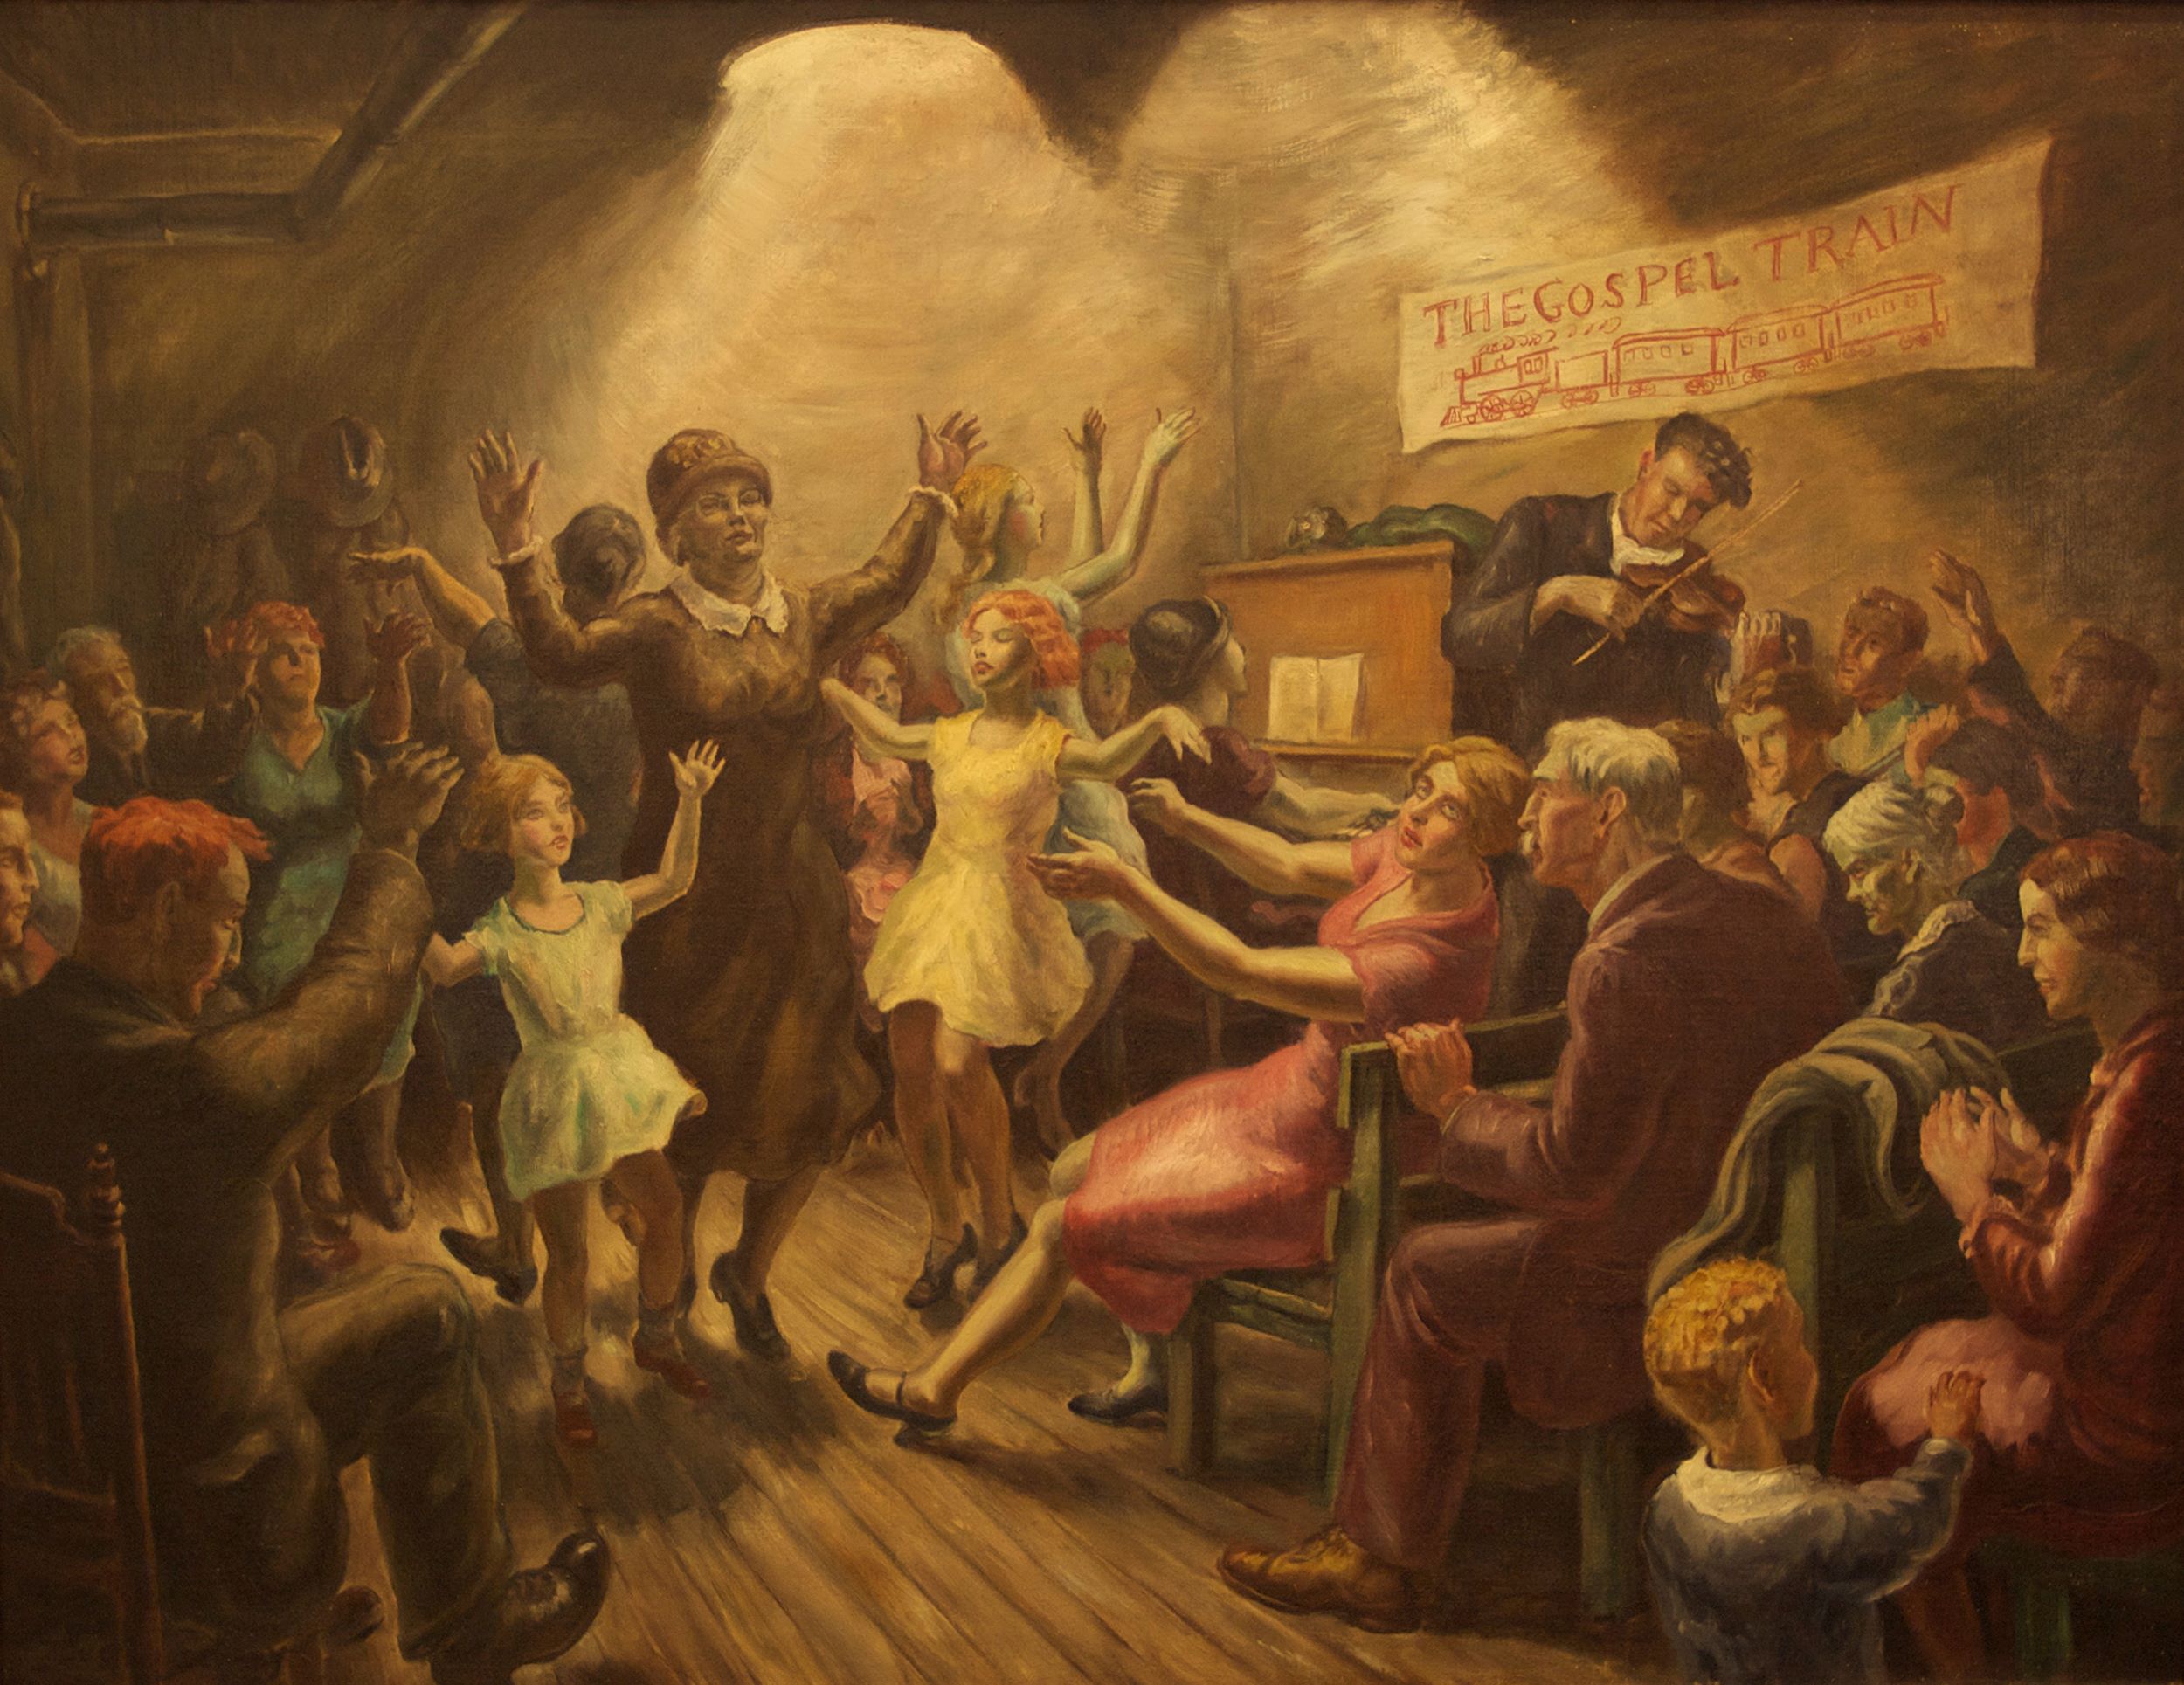 Oil painting showing a dimly lit interior with adults and children dancing and playing music on a piano and fiddle. A sign on the wall to the right reads "The Gospel Train" and features a simple illustration of an engine pulling four train cars.